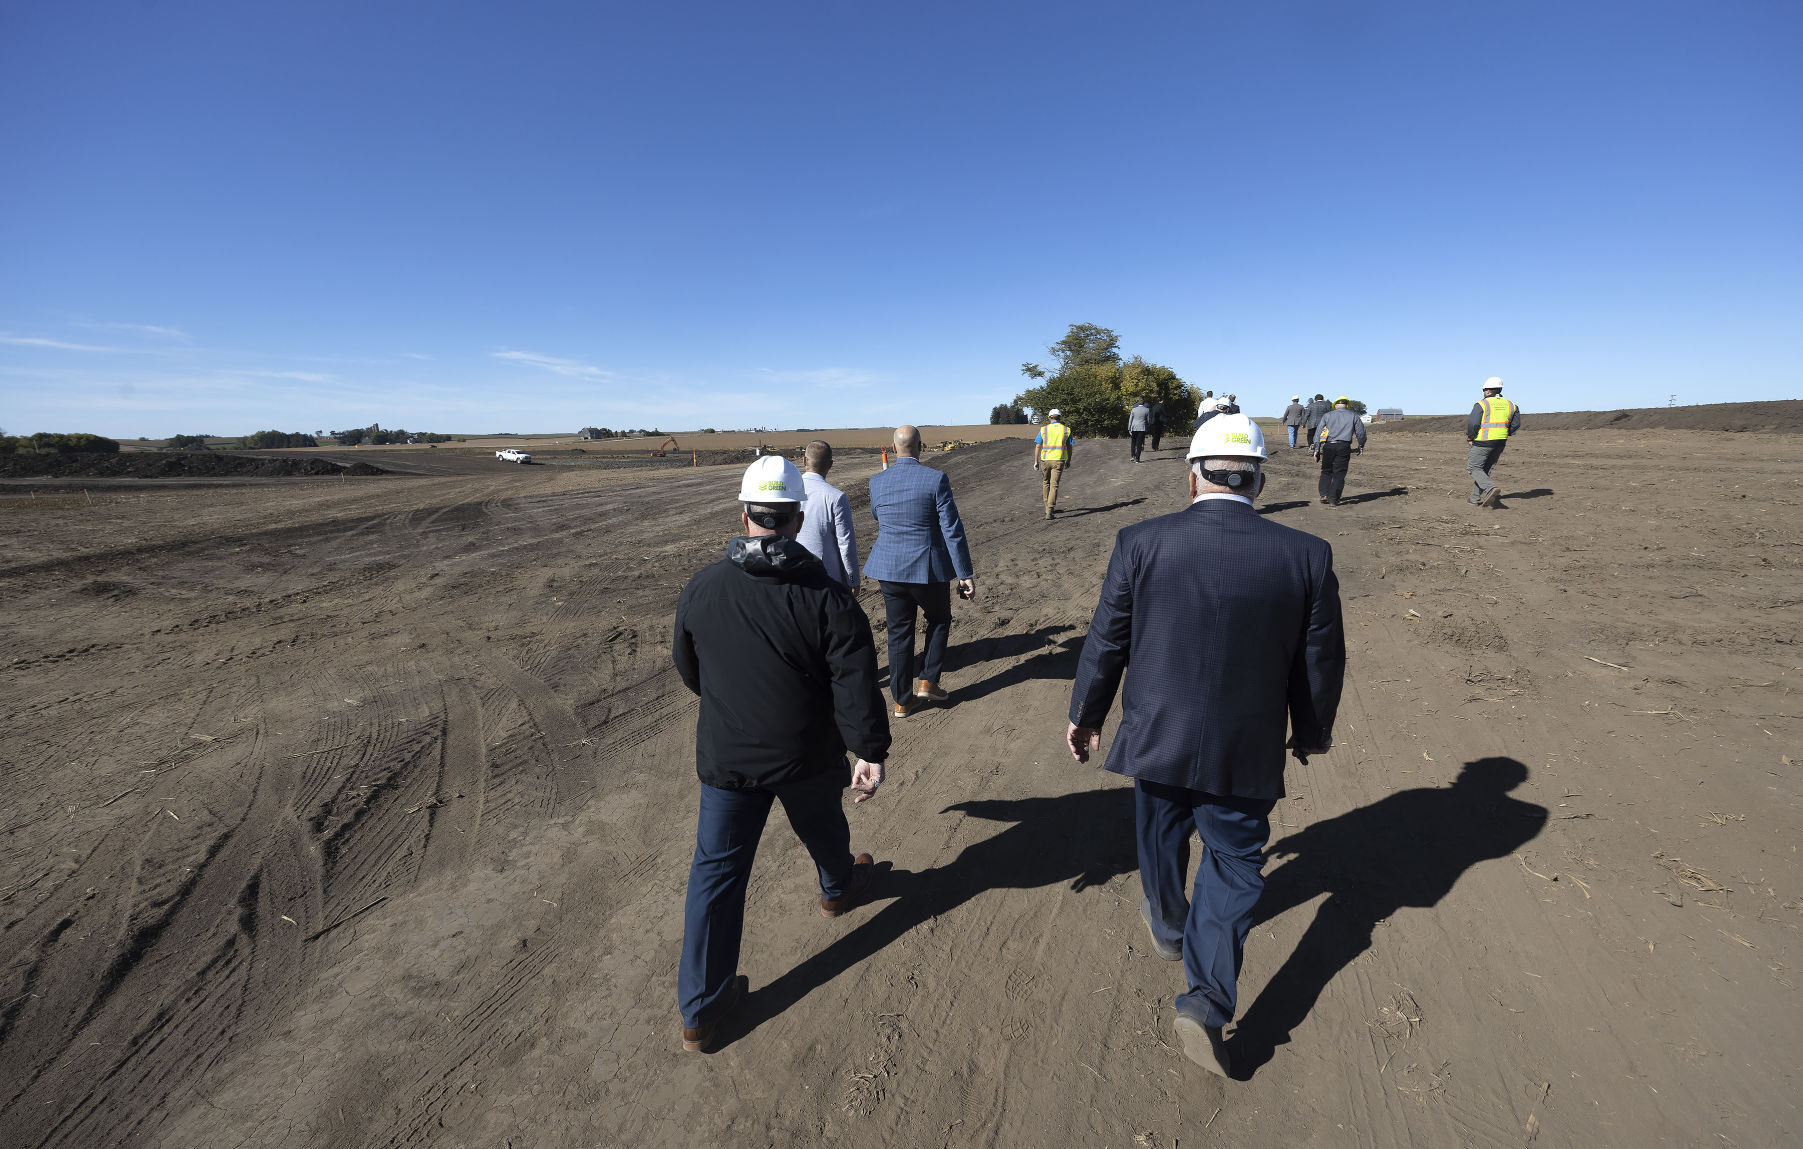 Visitors tour the construction site during the Project Heaven groundbreaking ceremony at the Field of Dreams in Dyersville, Iowa, on Wednesday,Sept. 28, 2022.    PHOTO CREDIT: Stephen Gassman